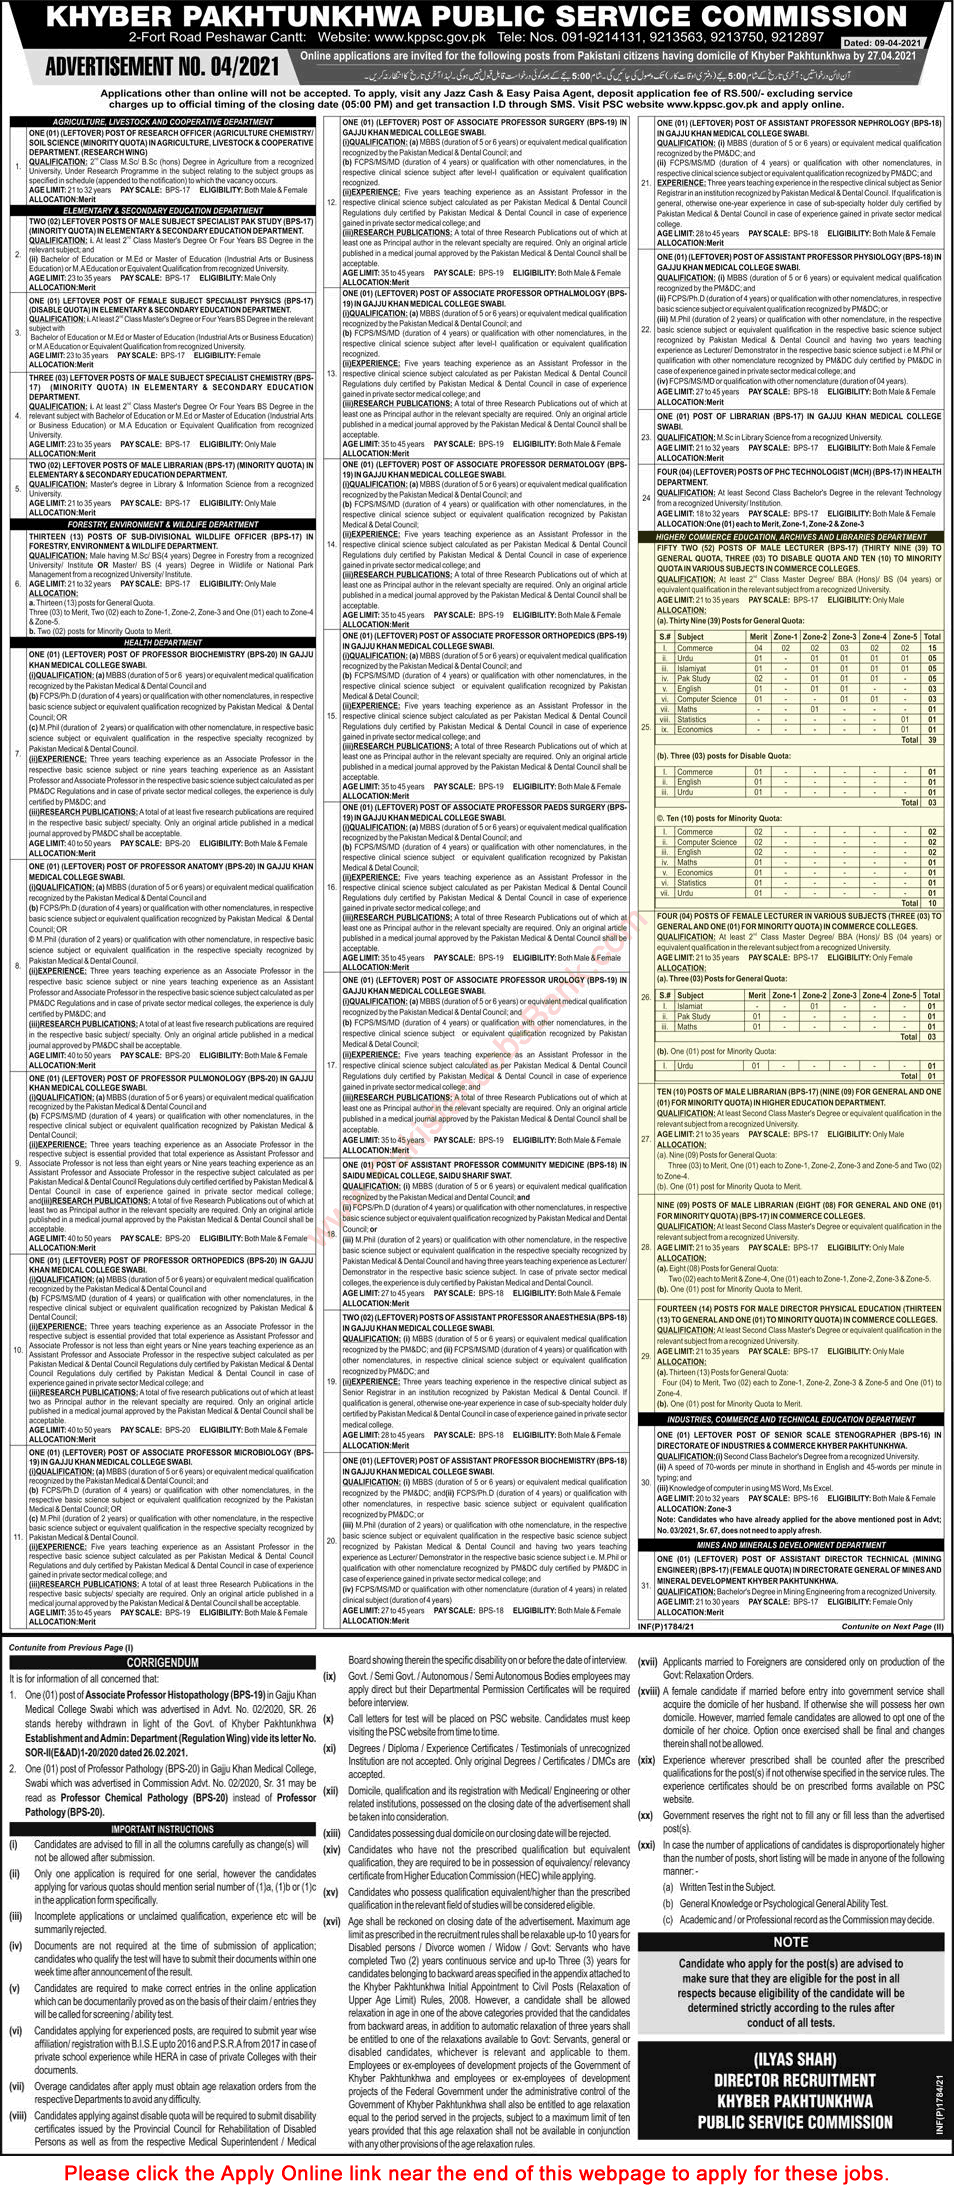 Higher Commerce Education Archives and Libraries Department KPK Jobs April 2021 KPPSC Apply Online Latest